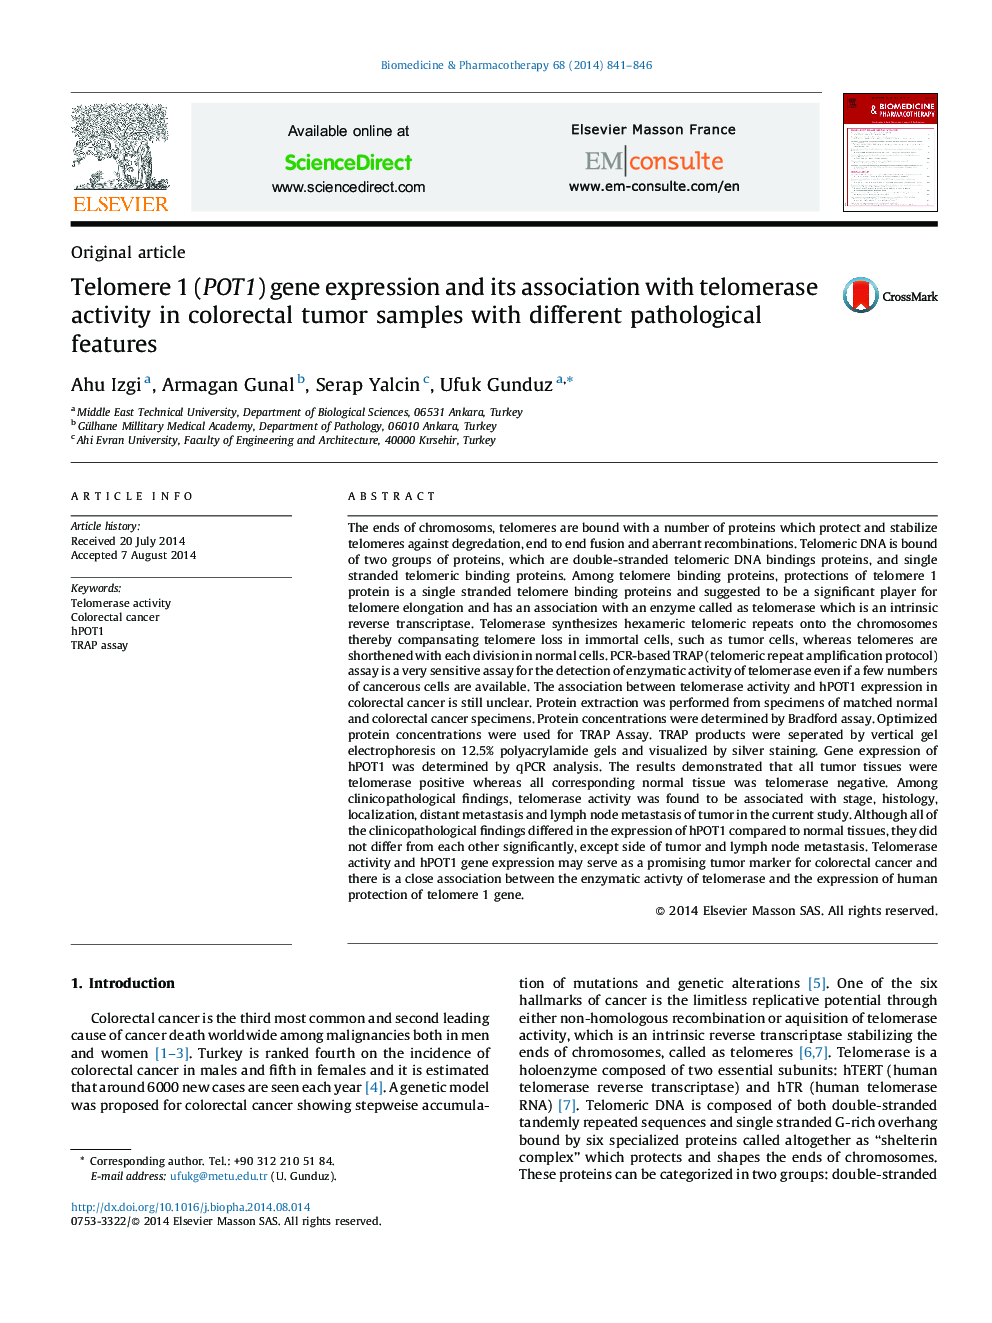 Telomere 1 (POT1) gene expression and its association with telomerase activity in colorectal tumor samples with different pathological features